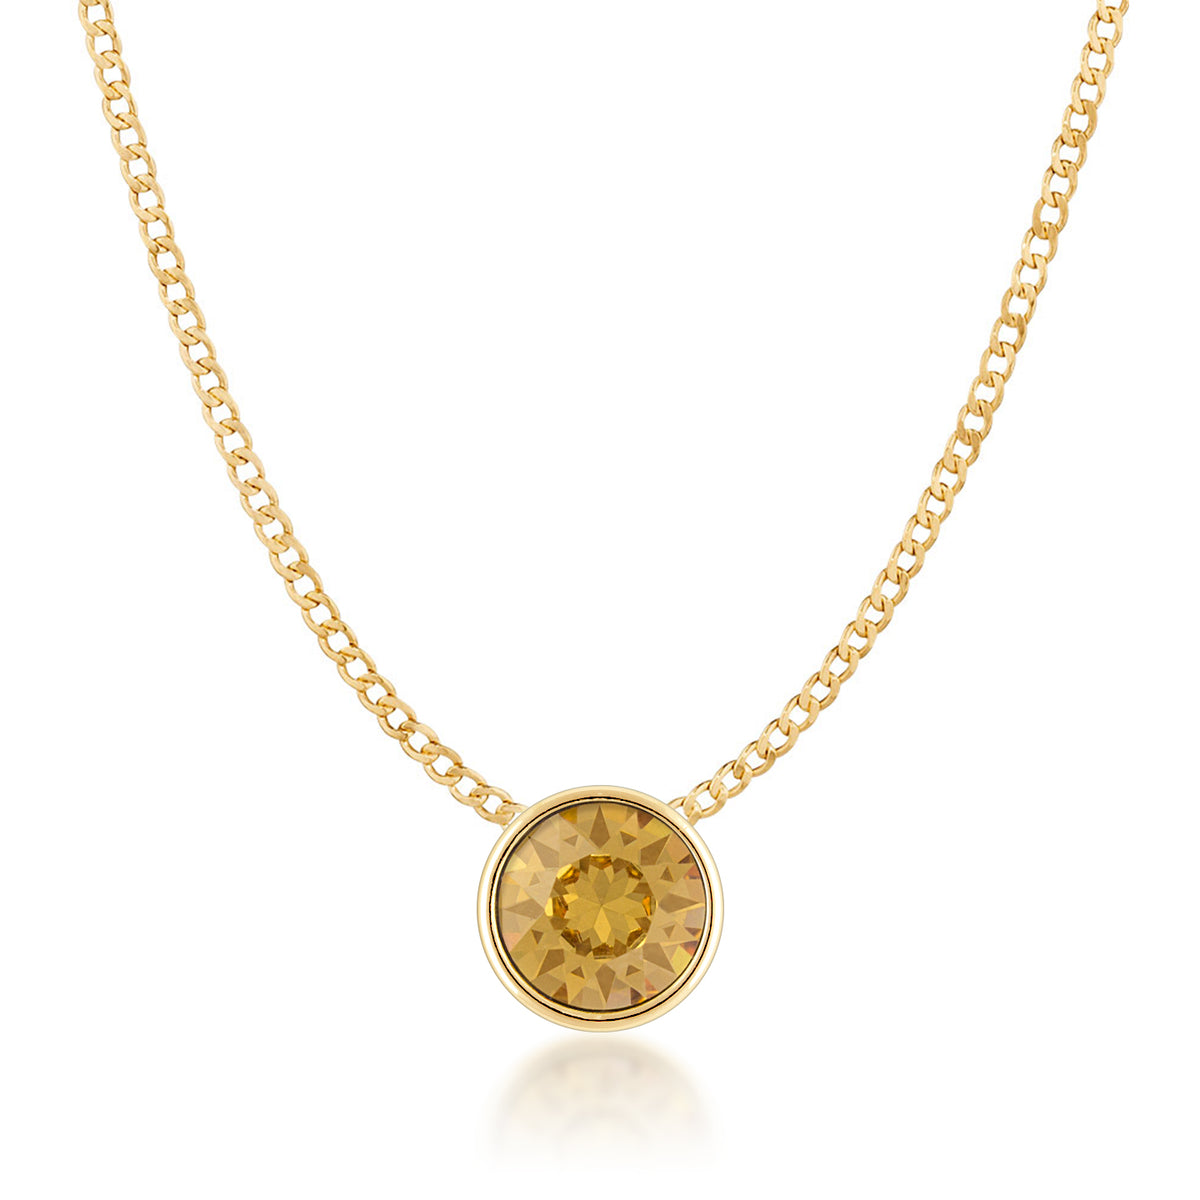 Harley Small Pendant Necklace with Yellow Brown Light Topaz Round Crystals from Swarovski Gold Plated - Ed Heart